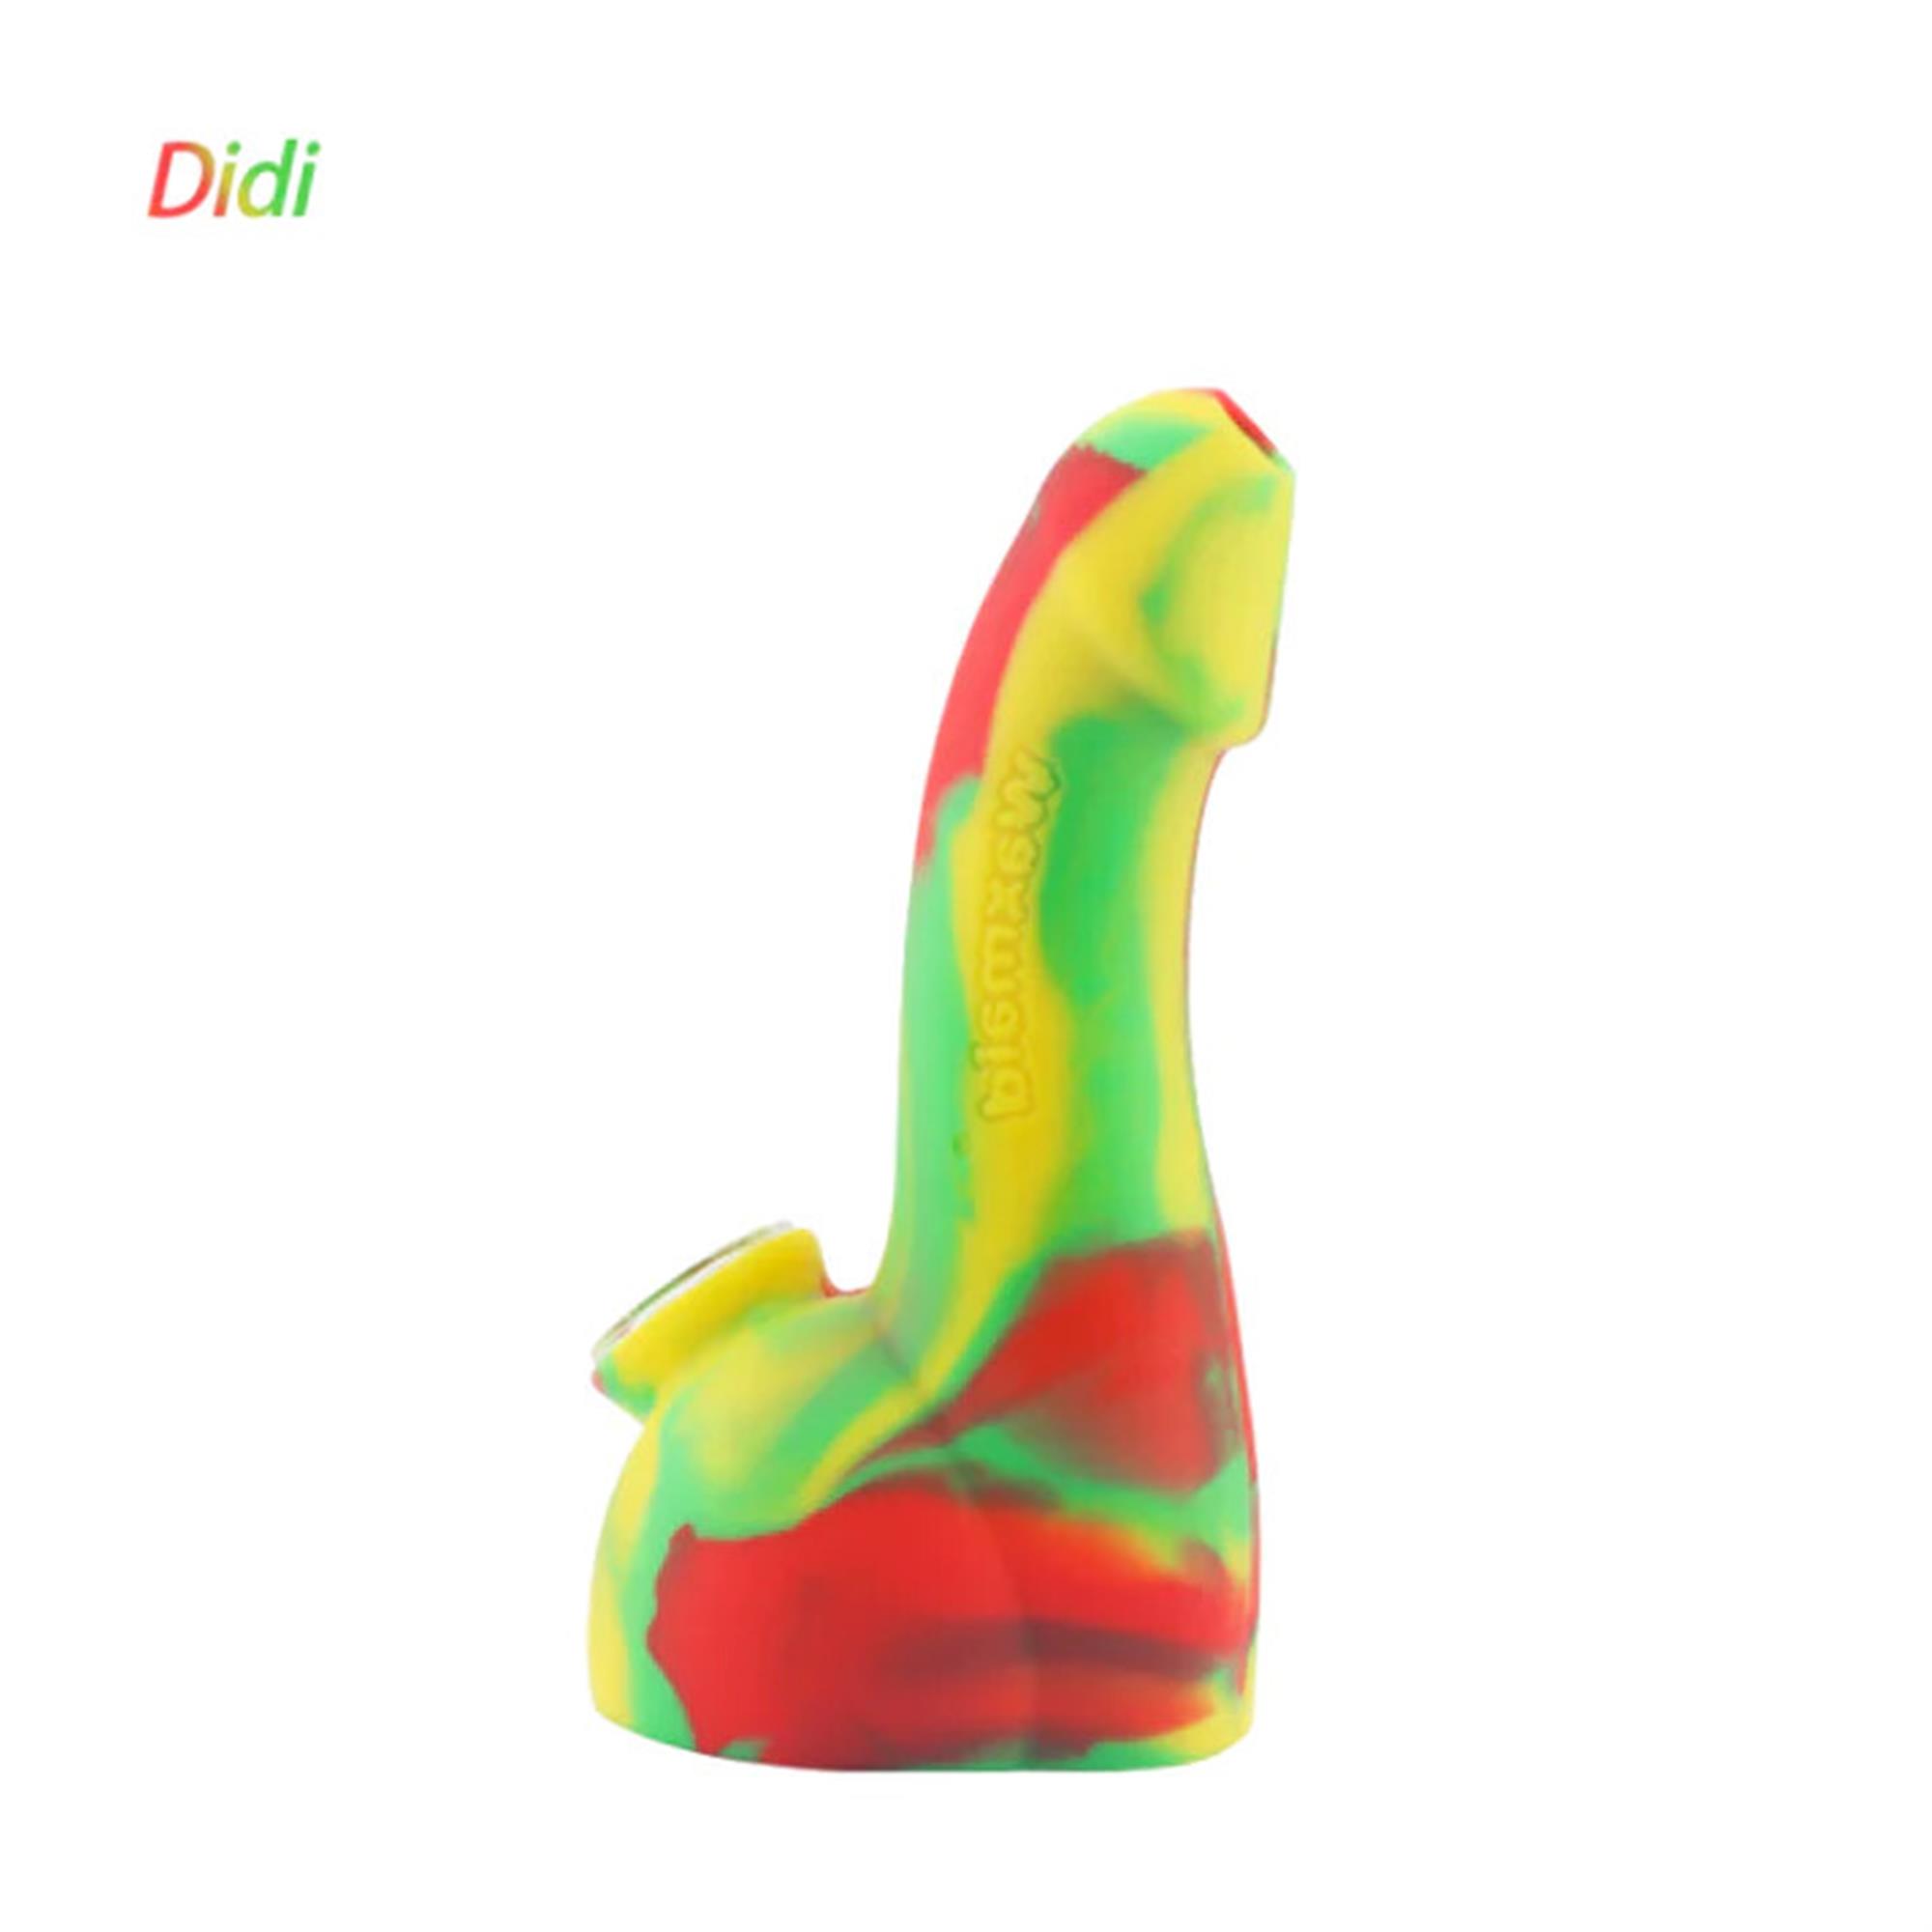 WAXMAID DIDI PENIS SILICONE 6 INCH DRY PIPE